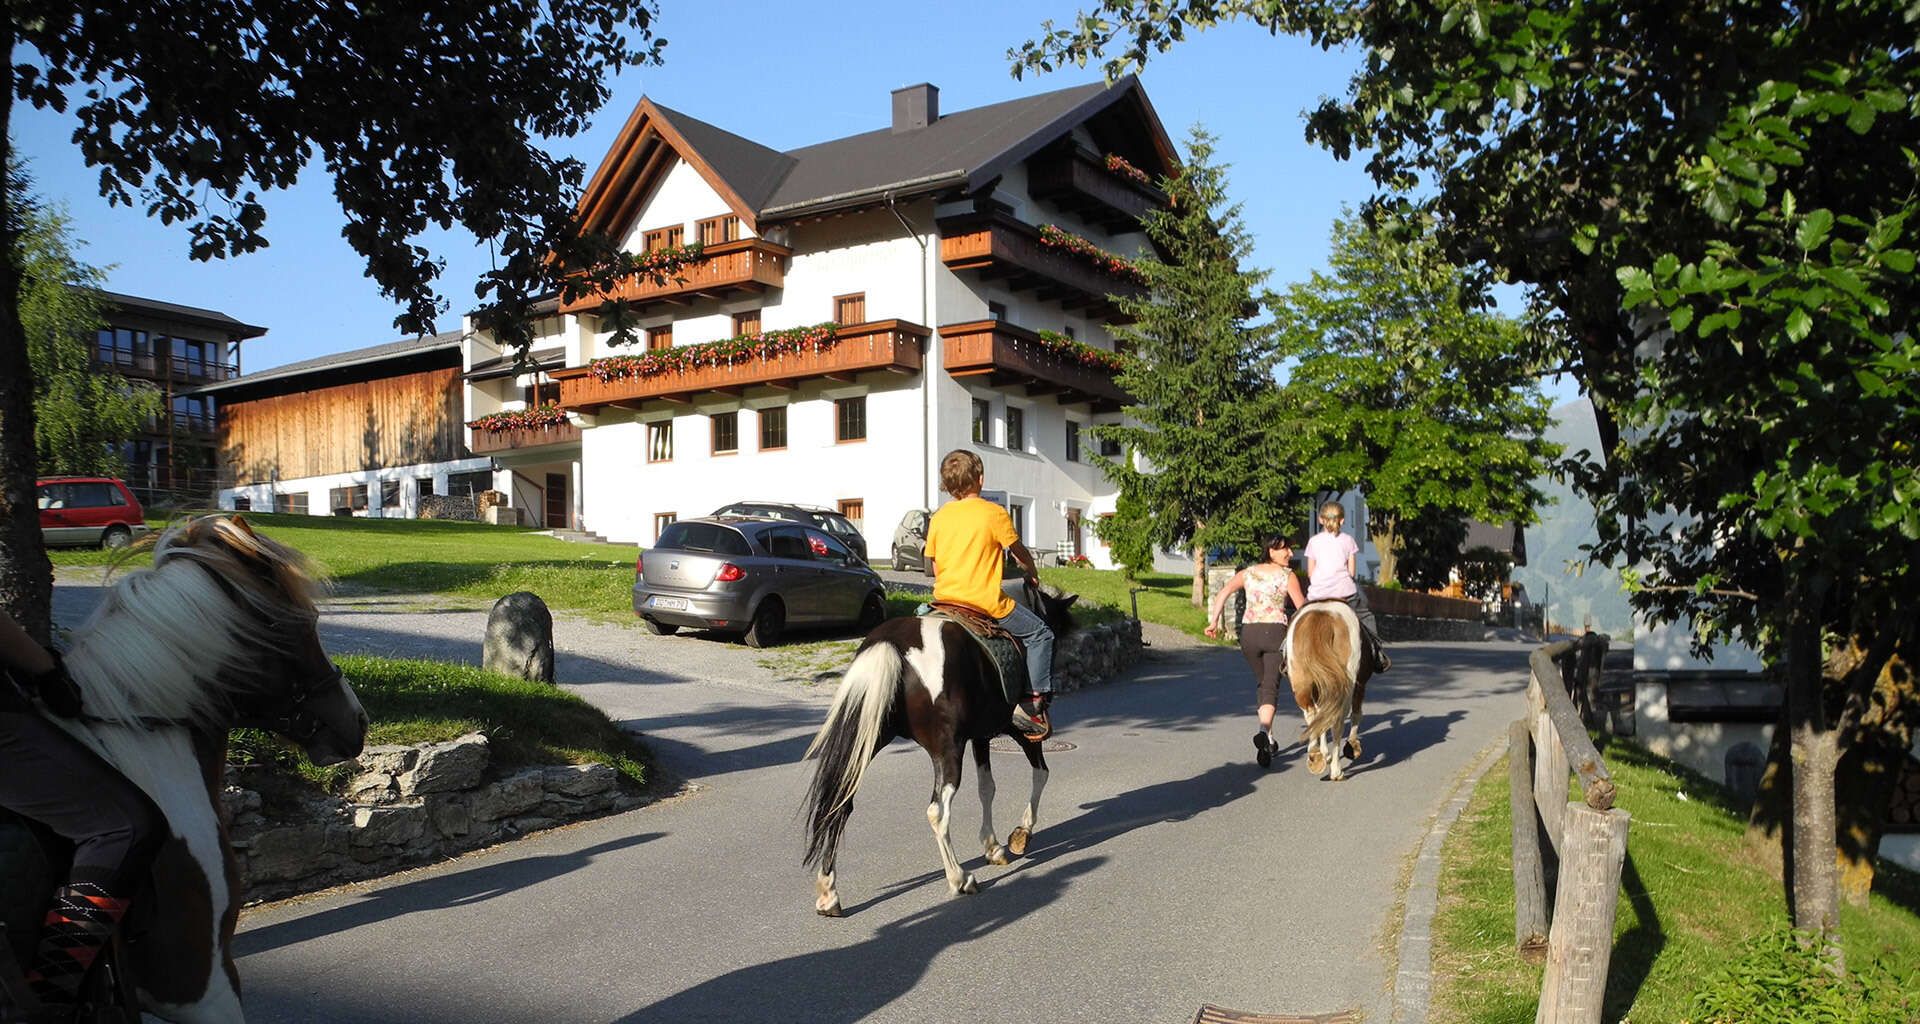 Children riding the ponies in Tyrol